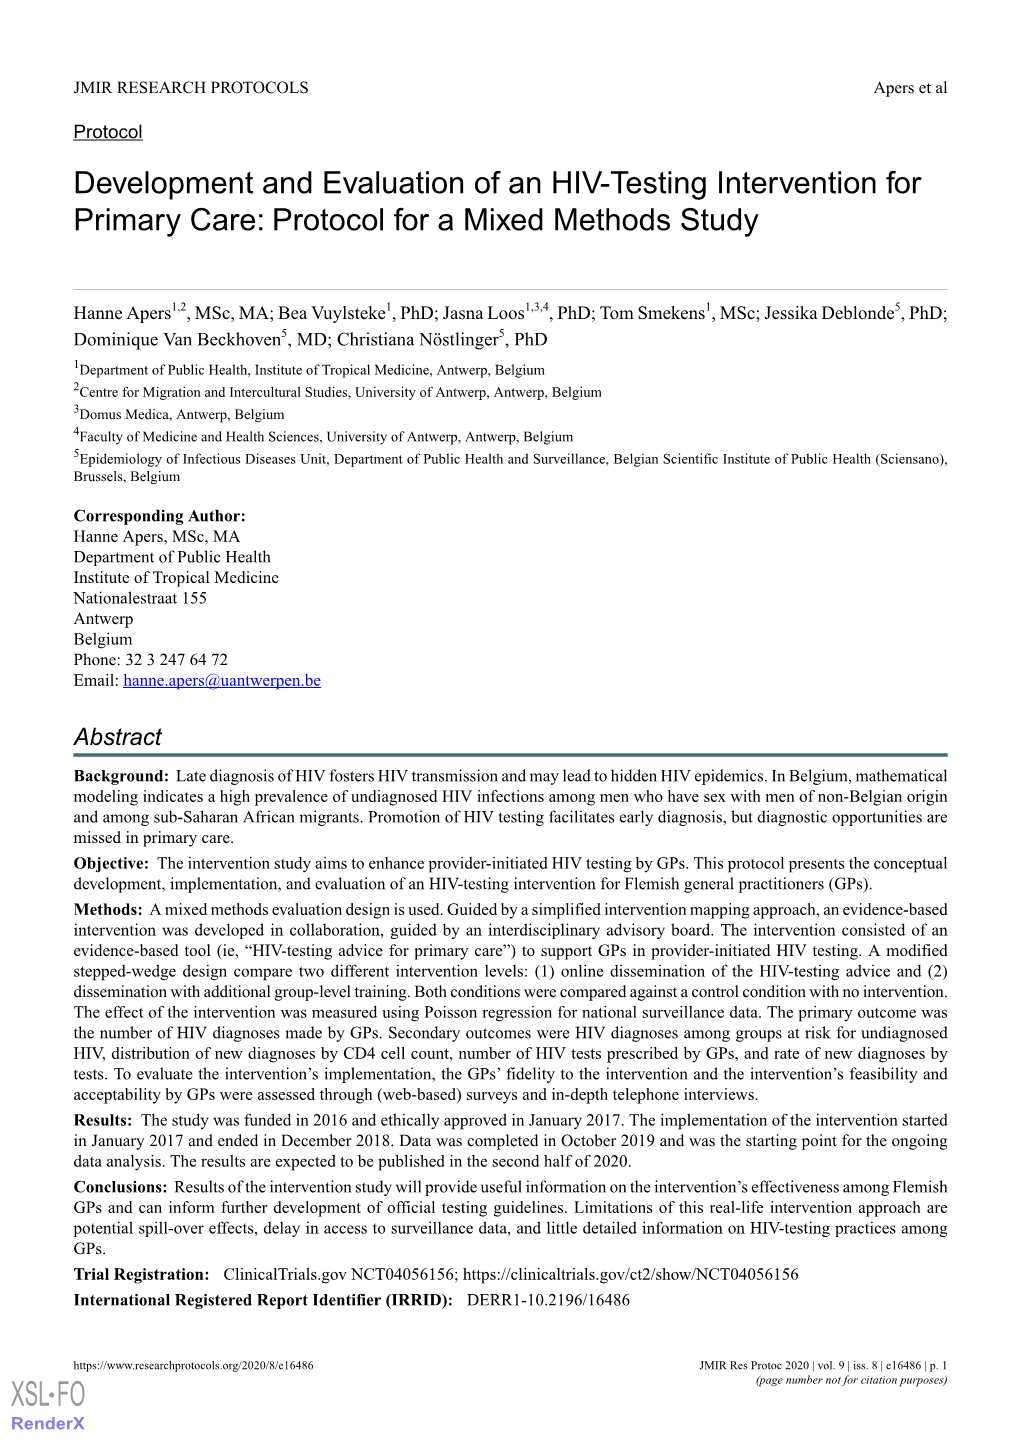 Development and Evaluation of an HIV-Testing Intervention for Primary Care: Protocol for a Mixed Methods Study